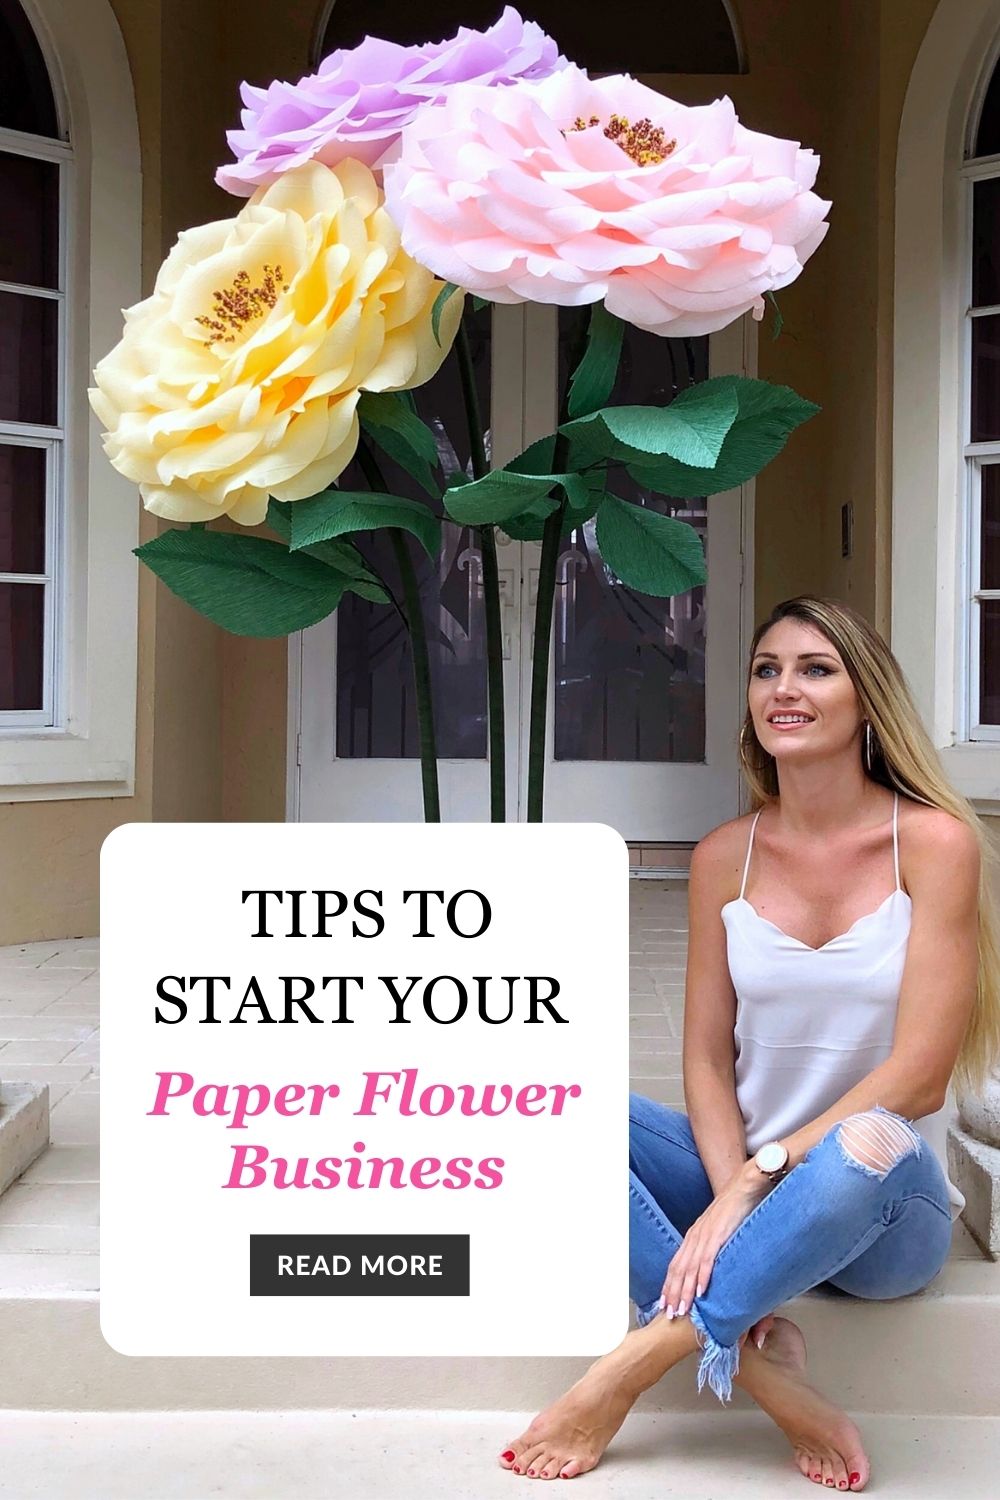 How to start a paper flower business